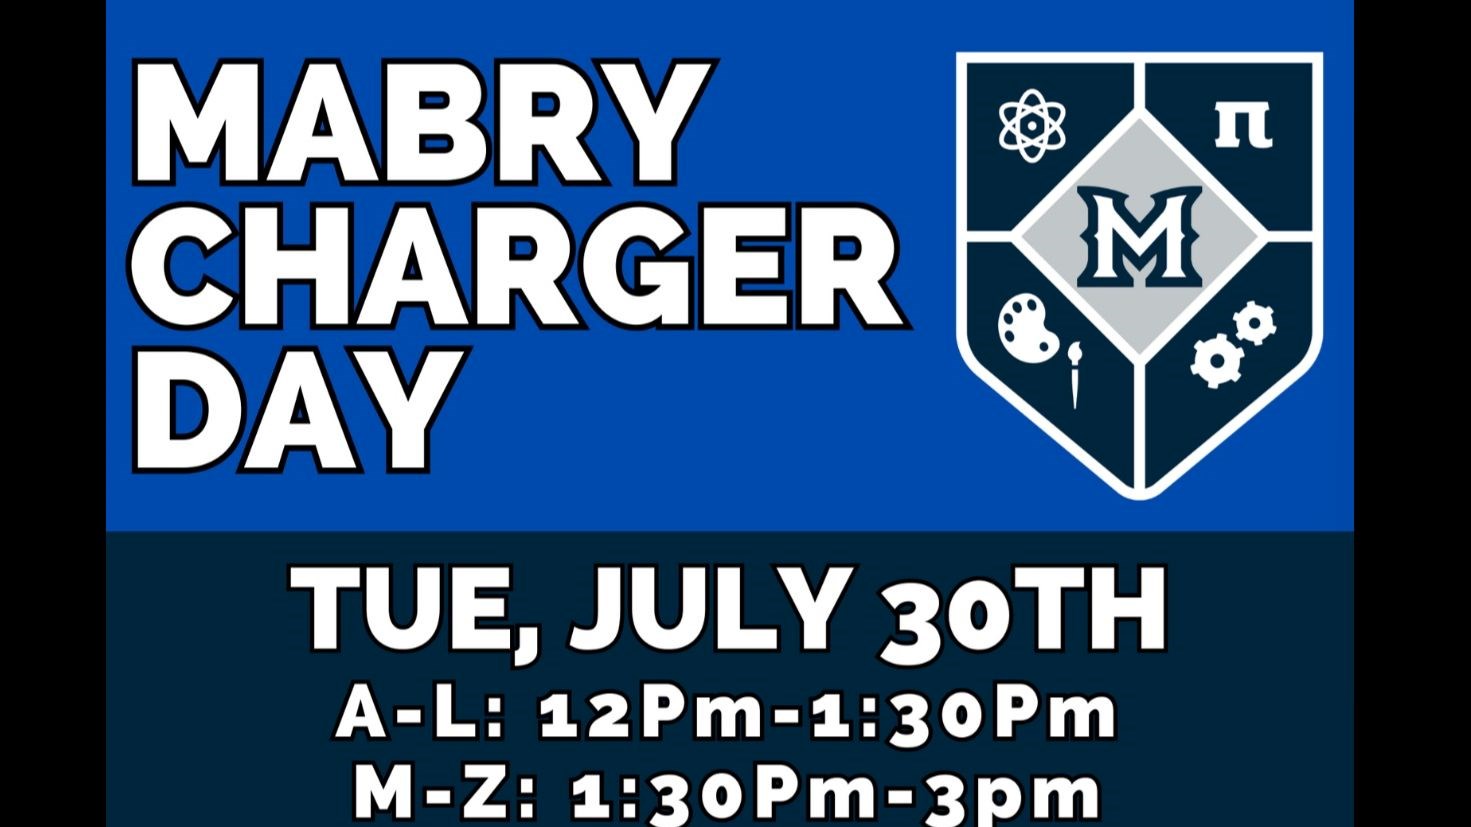 Charger Day is on July 30th from 12pm-3pm